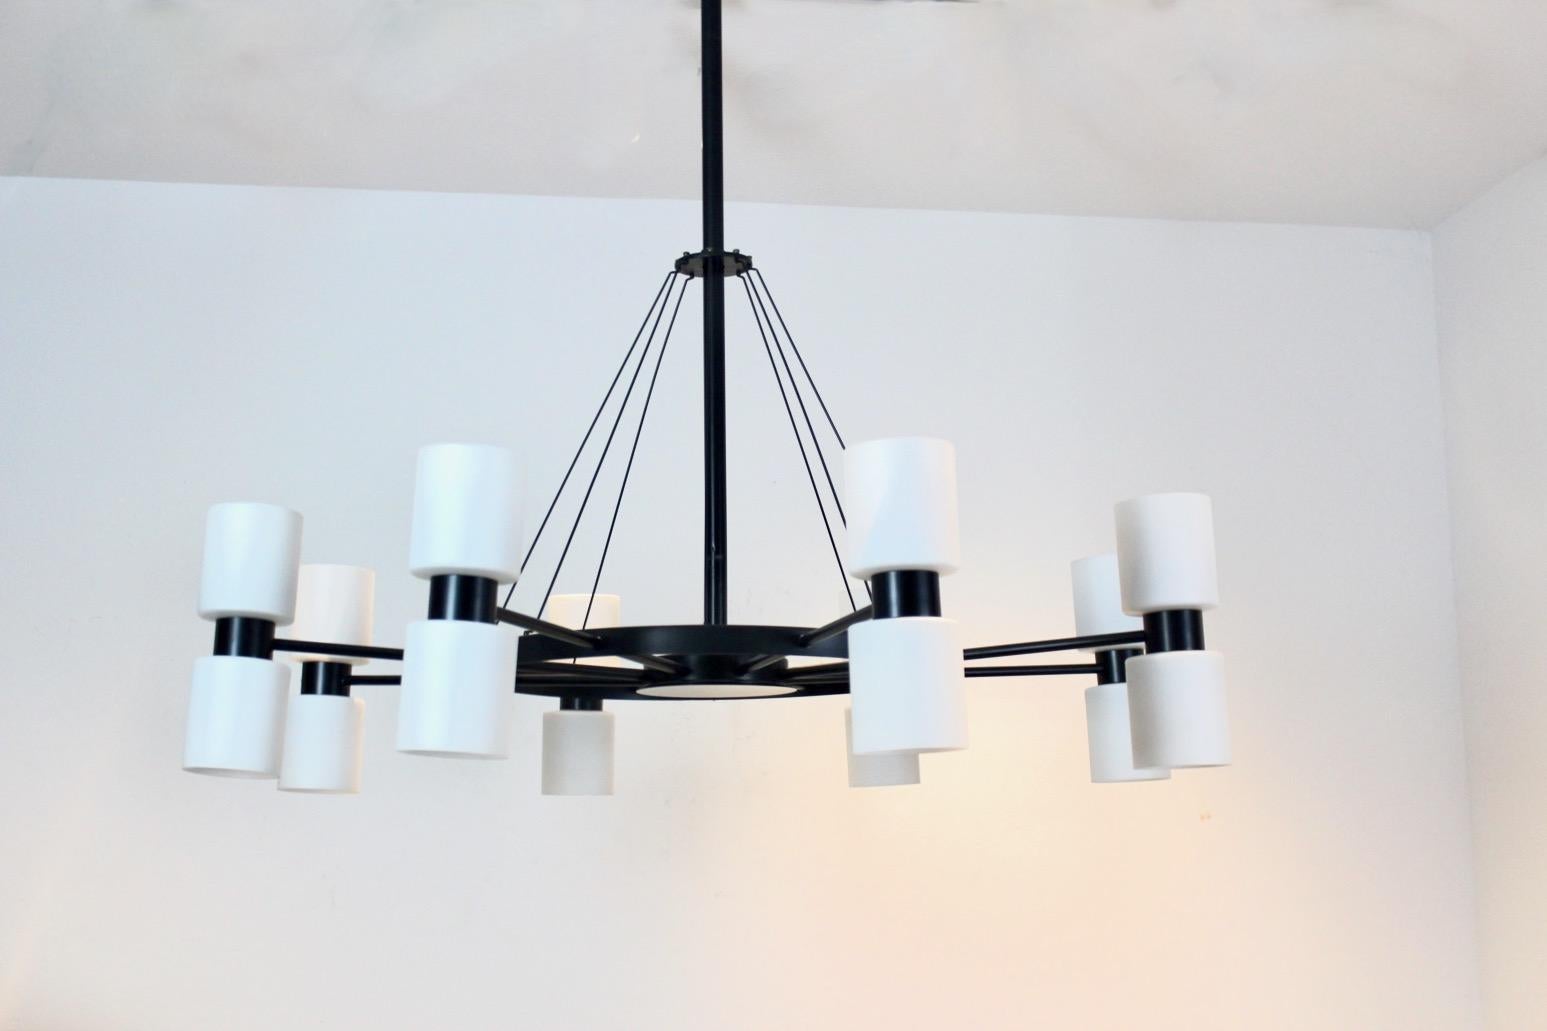 Dutch Exceptional 16-Light Chandelier 'Zonnewende' by J.W. Bosman for RAAK Amsterdam For Sale